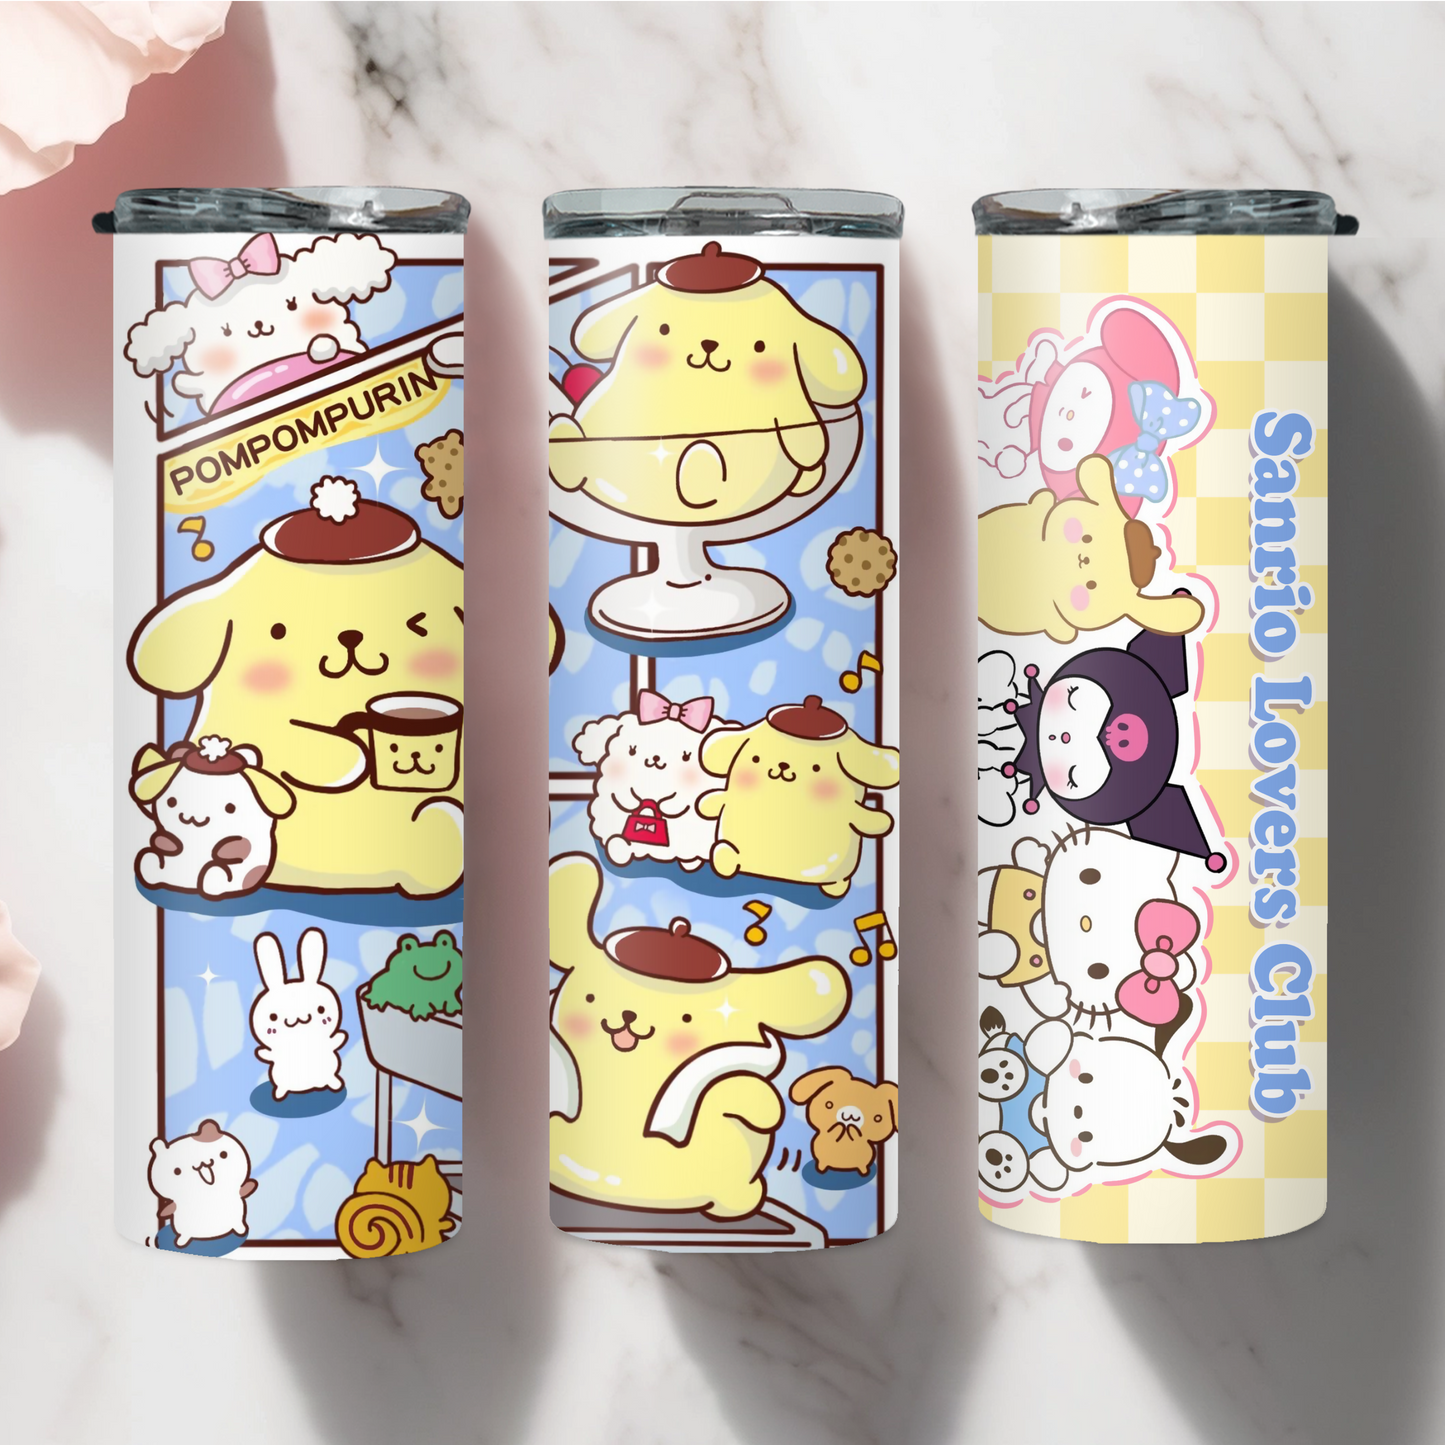 Sanrio- Pompompurin Anime 20oz Tumbler with Straw and Lid